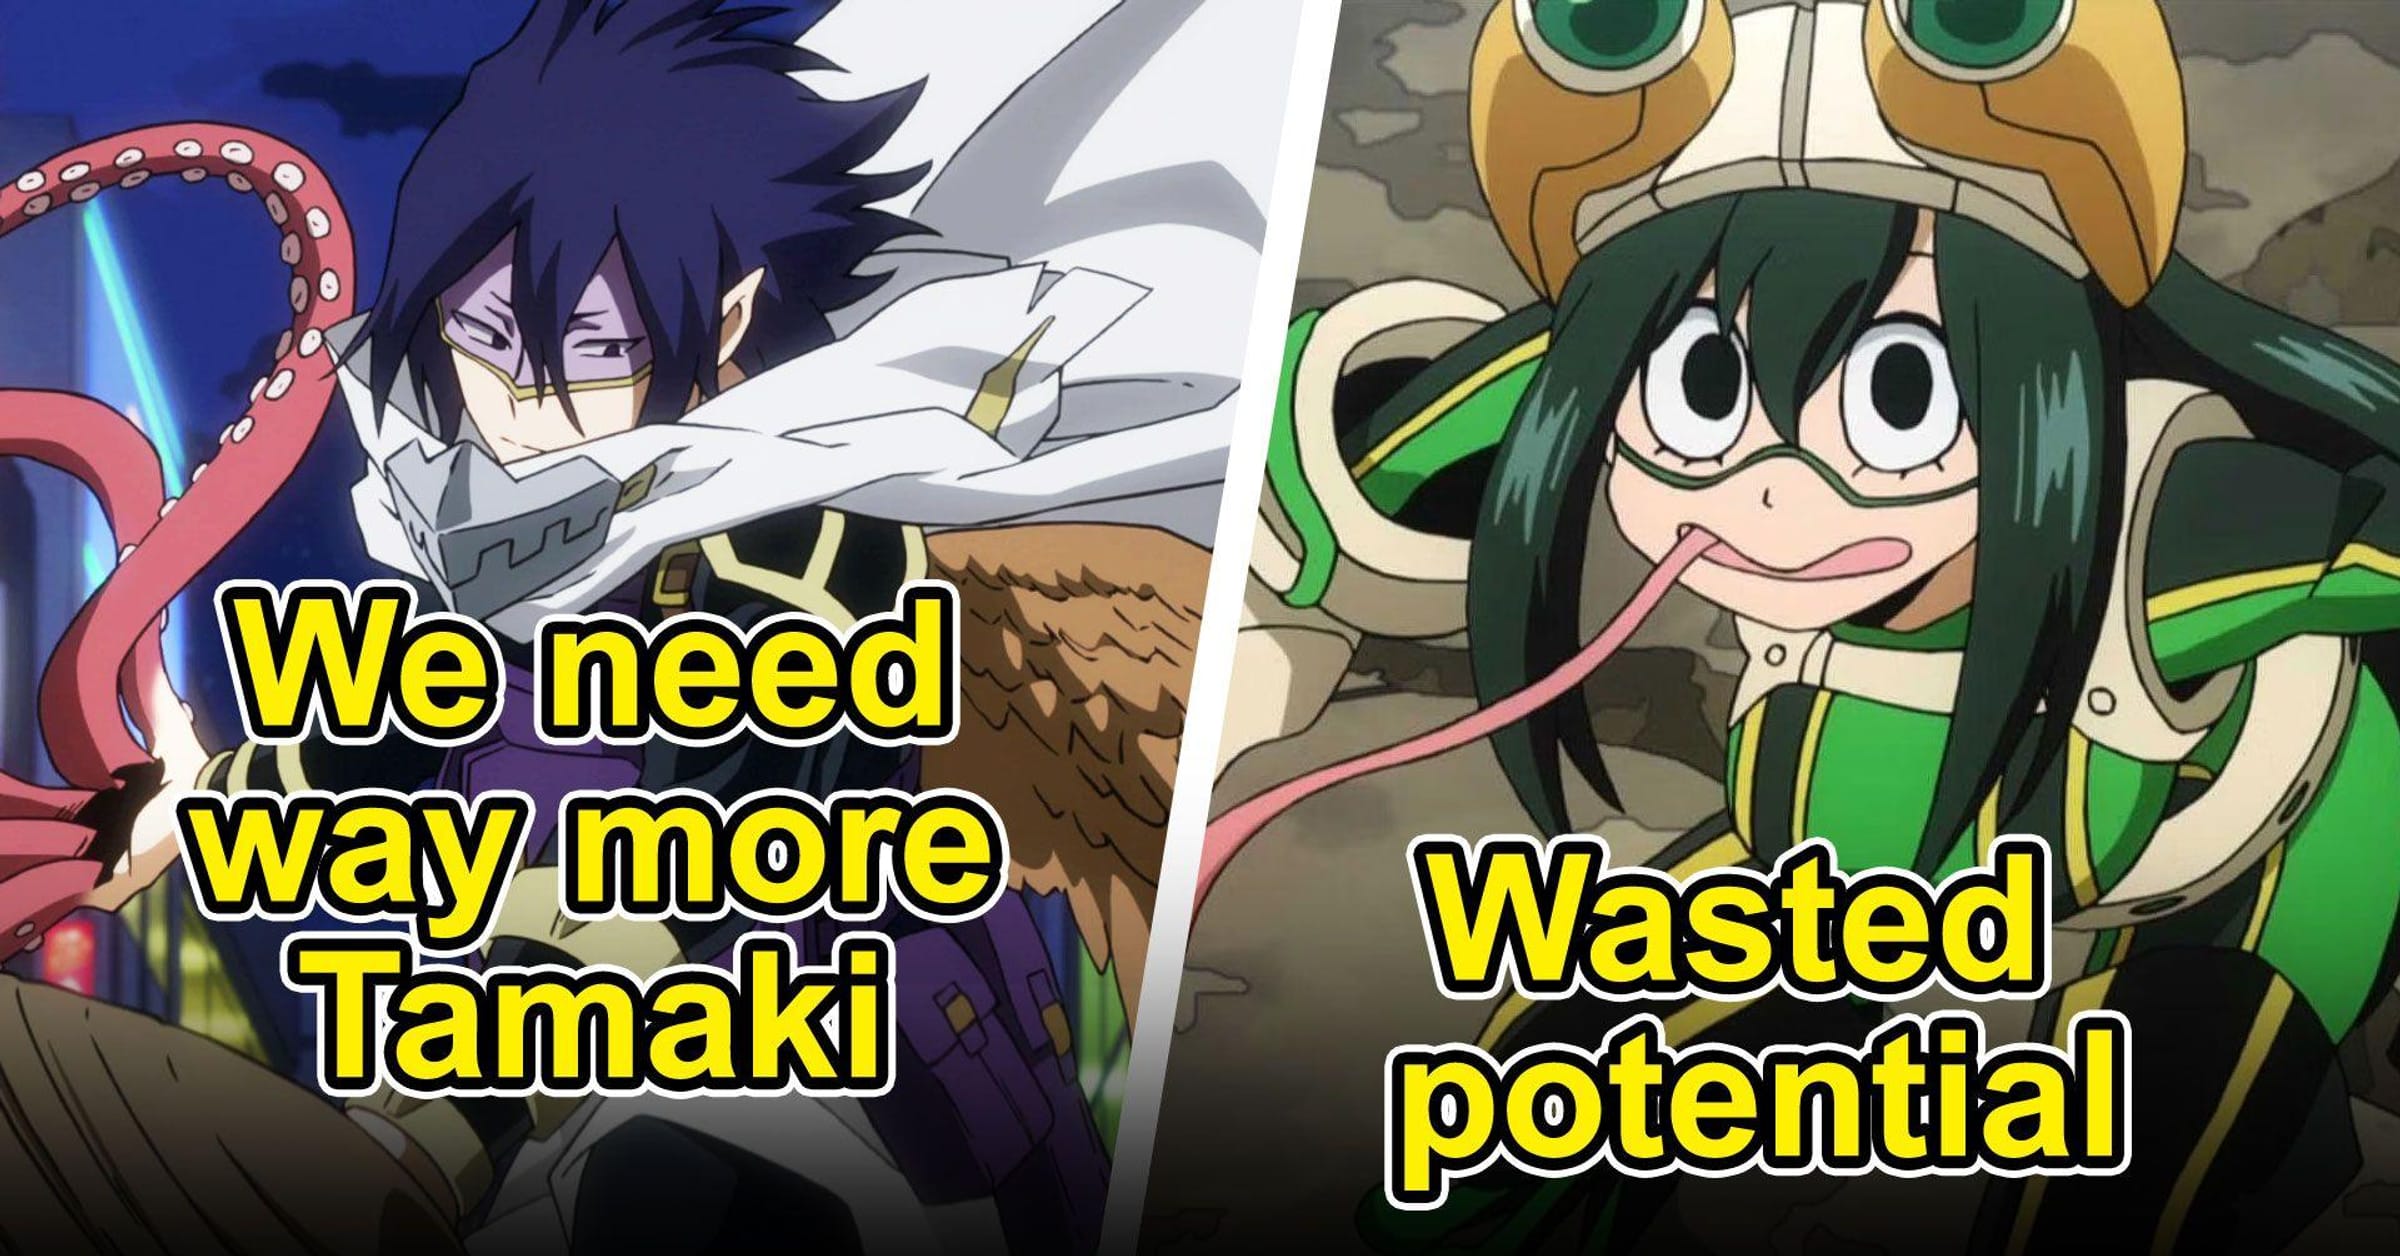 My Hero Academia: 10 Underused Characters In World Heroes' Mission